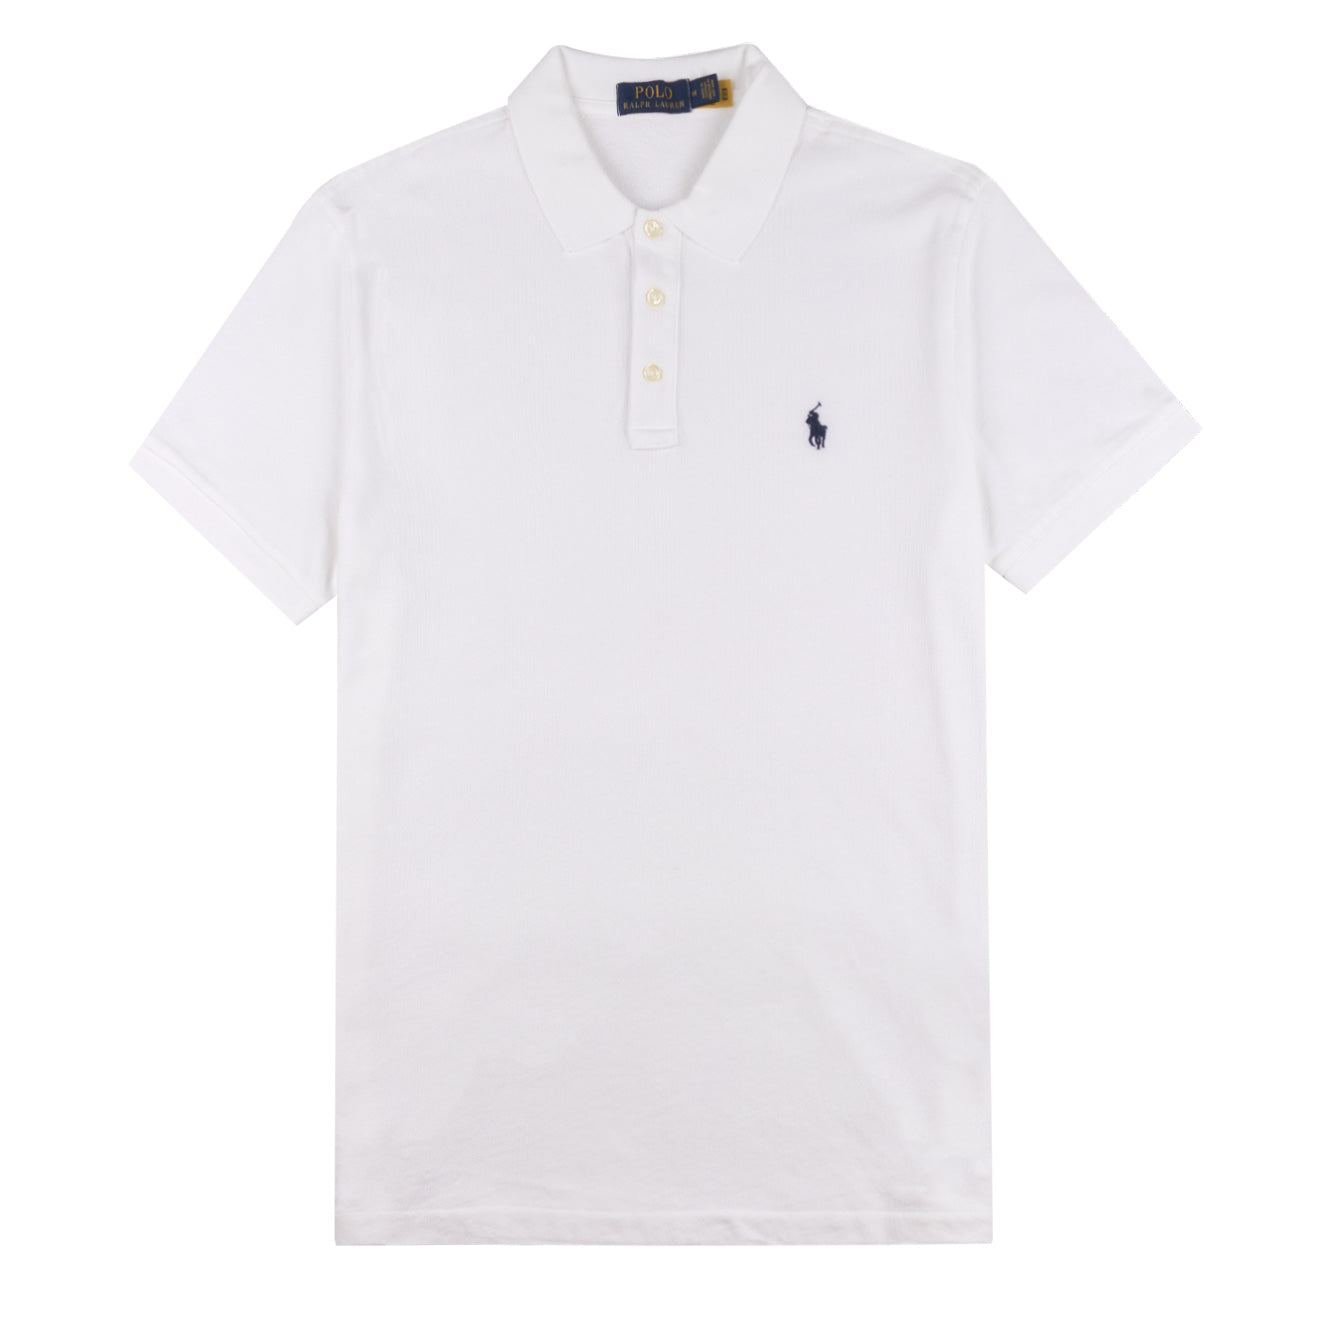 Polo Ralph Lauren Classic S/S Polo White | The Sporting Lodge